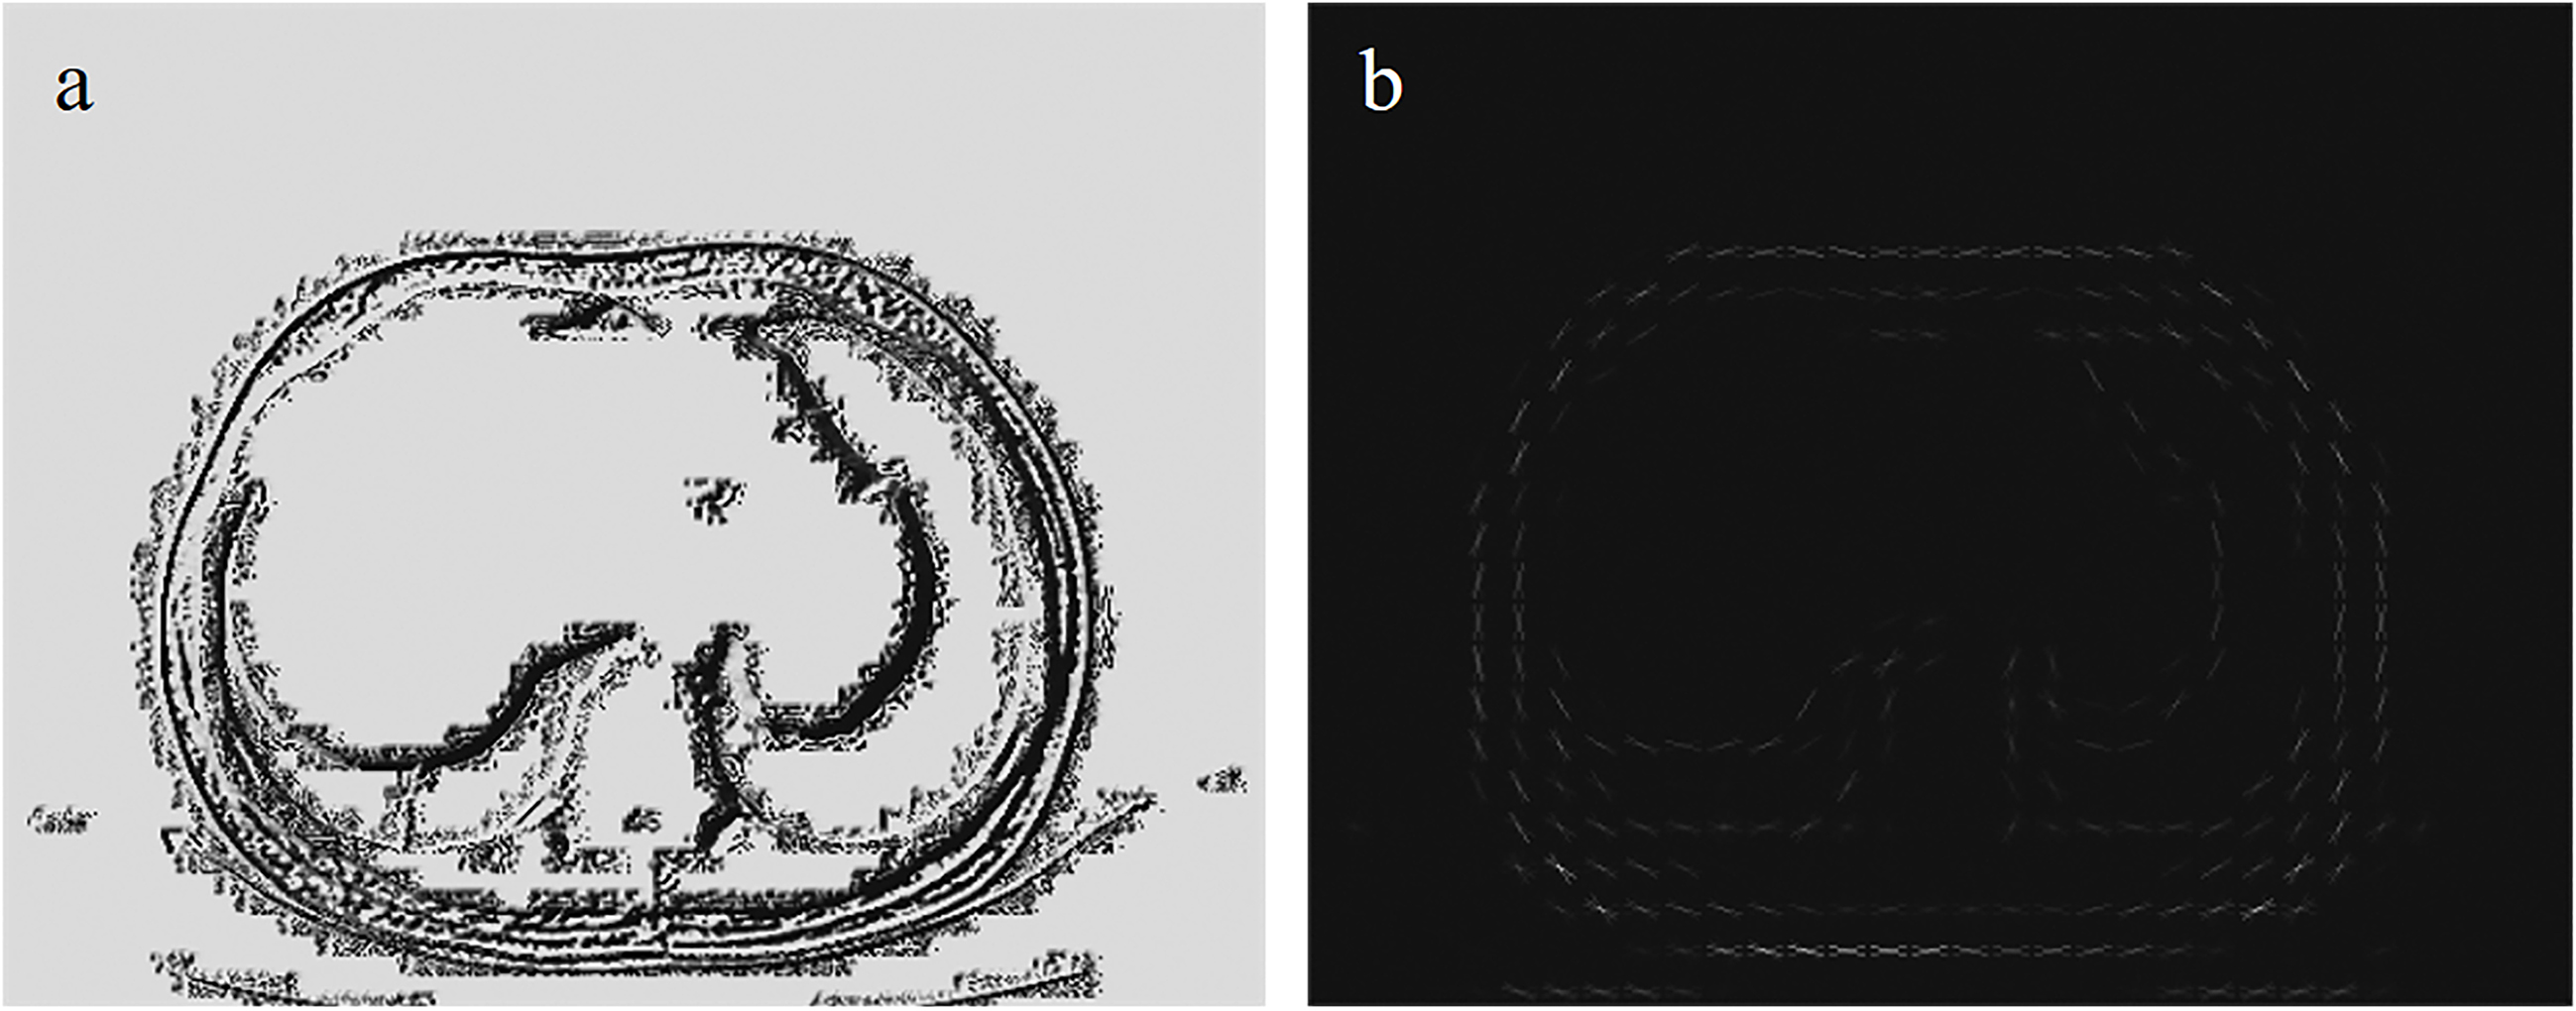 LBP feature and HOG feature. Figure (a) is the LBP feature extracted from the T11 layer CT image. Figure (b) is the HOG feature extracted from the T11 layer CT image.